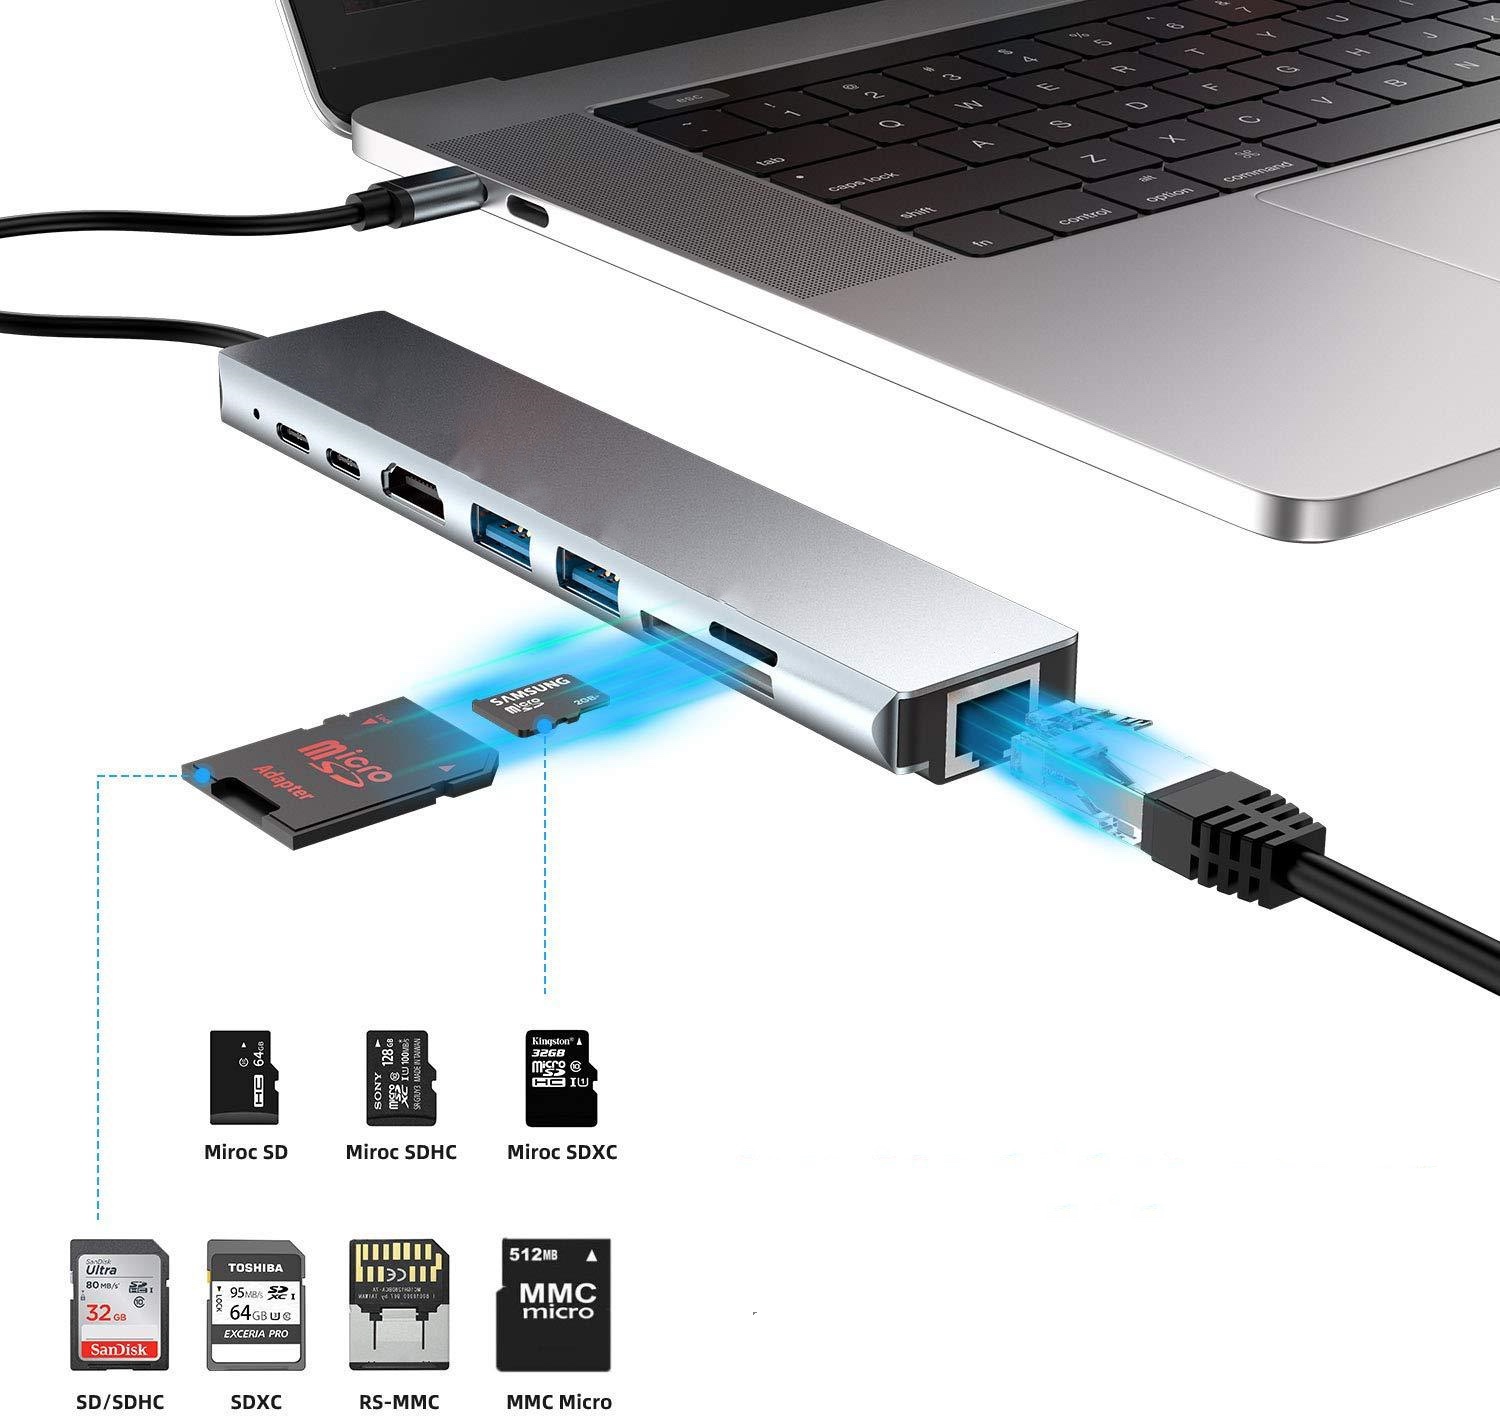 8 in 1 Type C Hub 4K HDMI Output 2 USB 3.0 Port SD/TF Card Reader USB-C Converter Multi-port Adapter for MacBook Pro Samsung Galaxy S9/S8 Plus Huawei Mate 10/P20 Type C